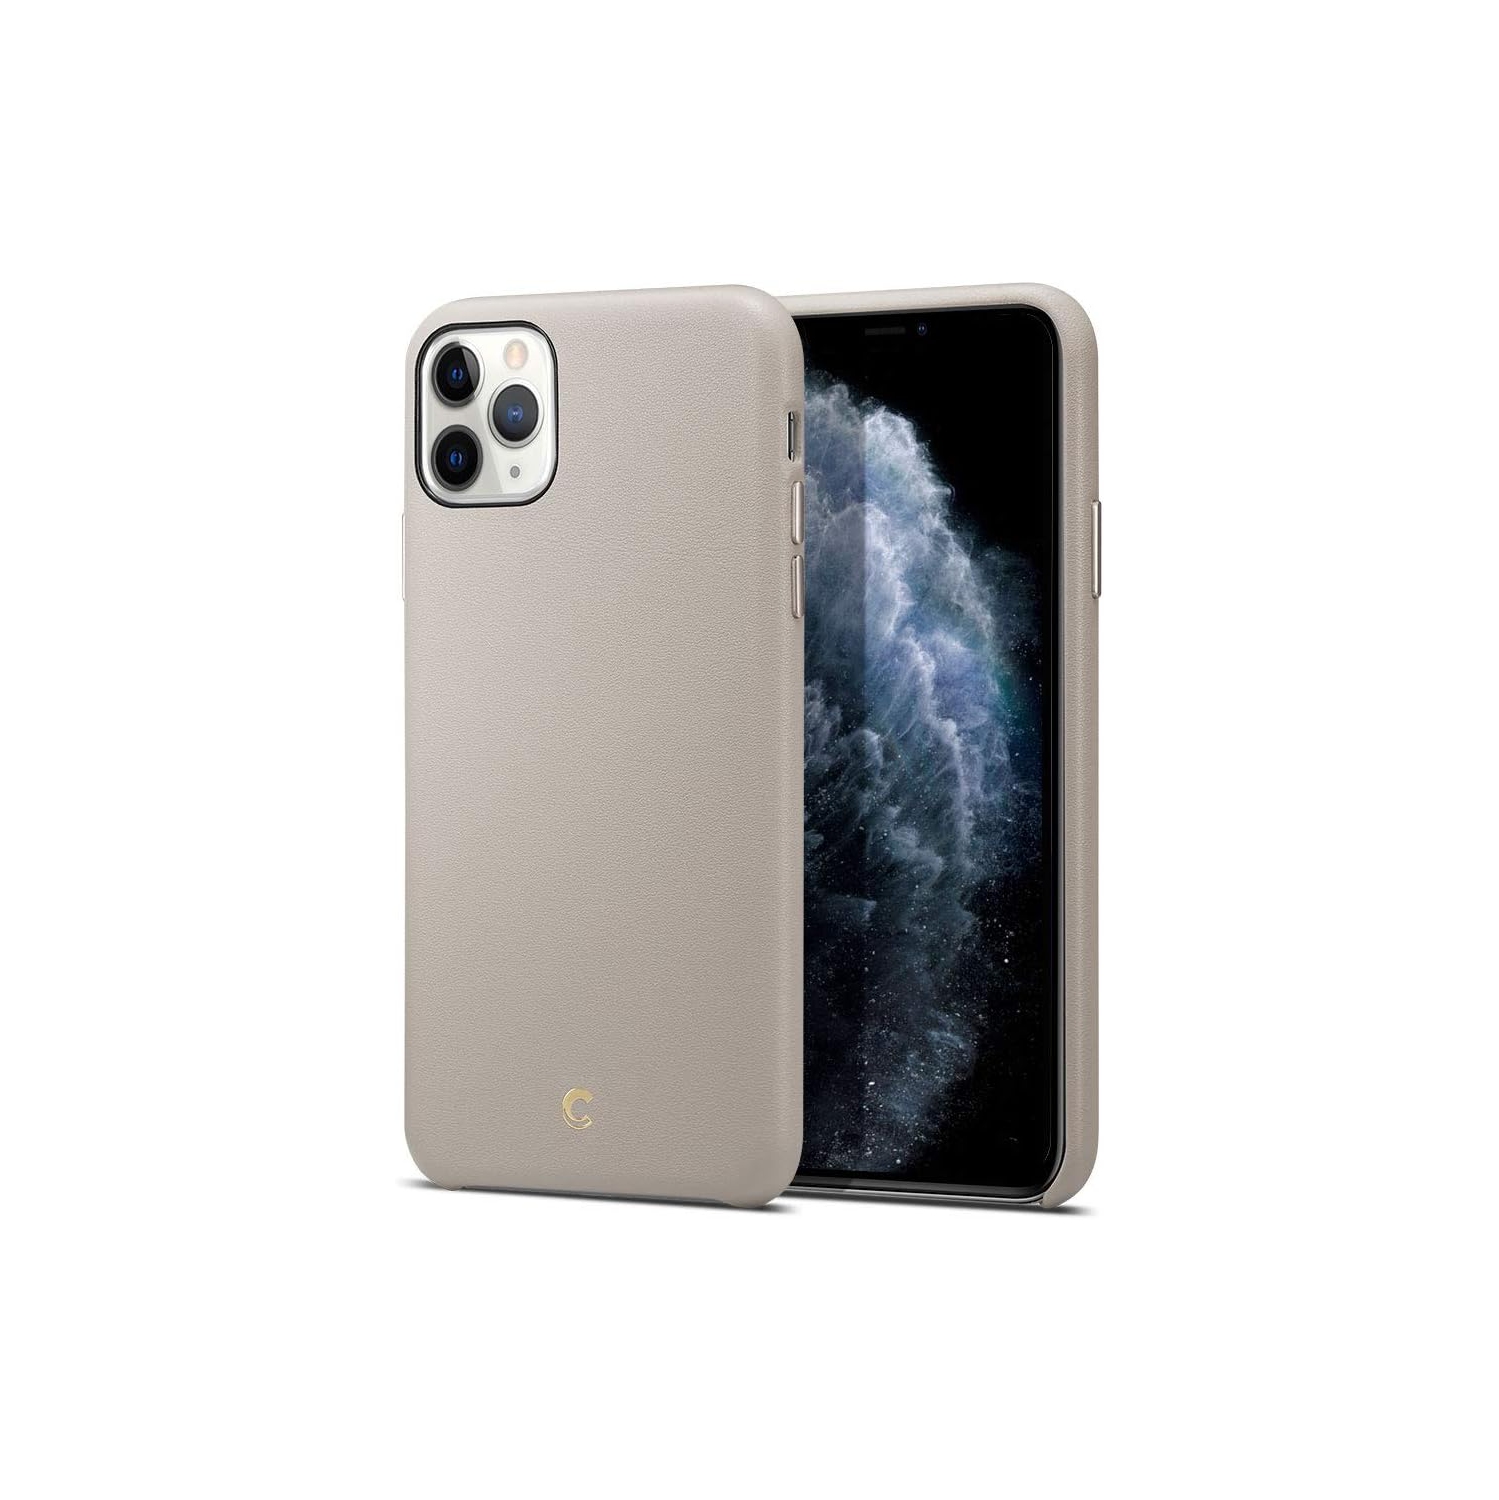 iPhone 11 Pro case, by Spigen Basic Leather Collection Designed for iPhone 11 Pro Case - Taupe